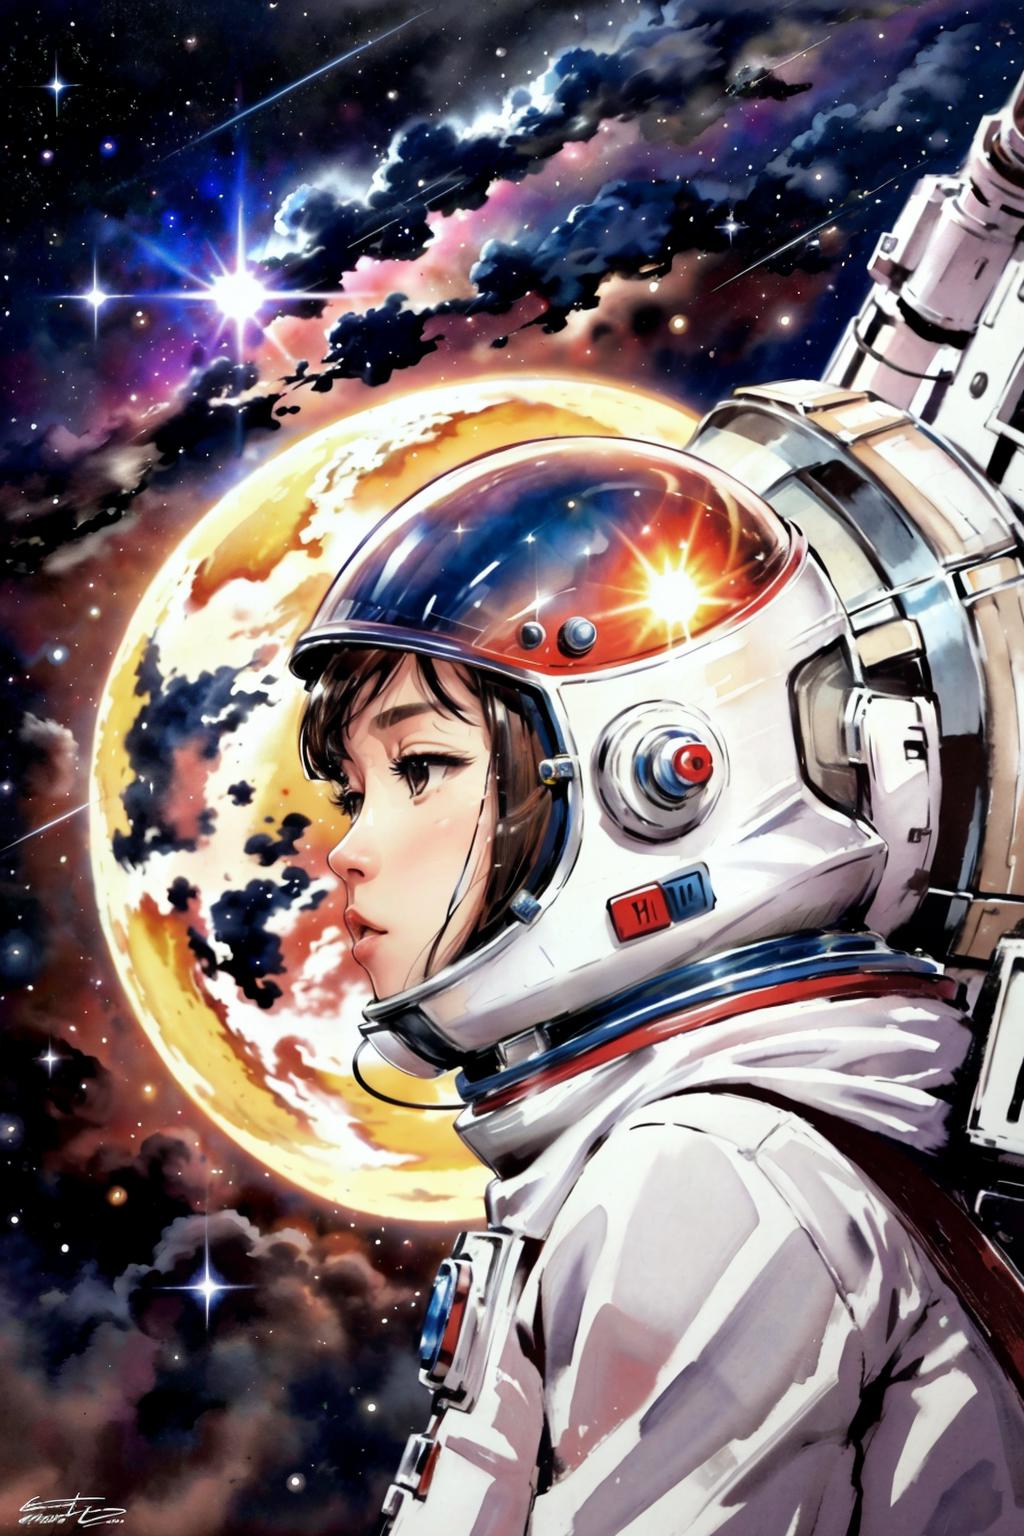 KREA - Search results for anime astronaut relaxing